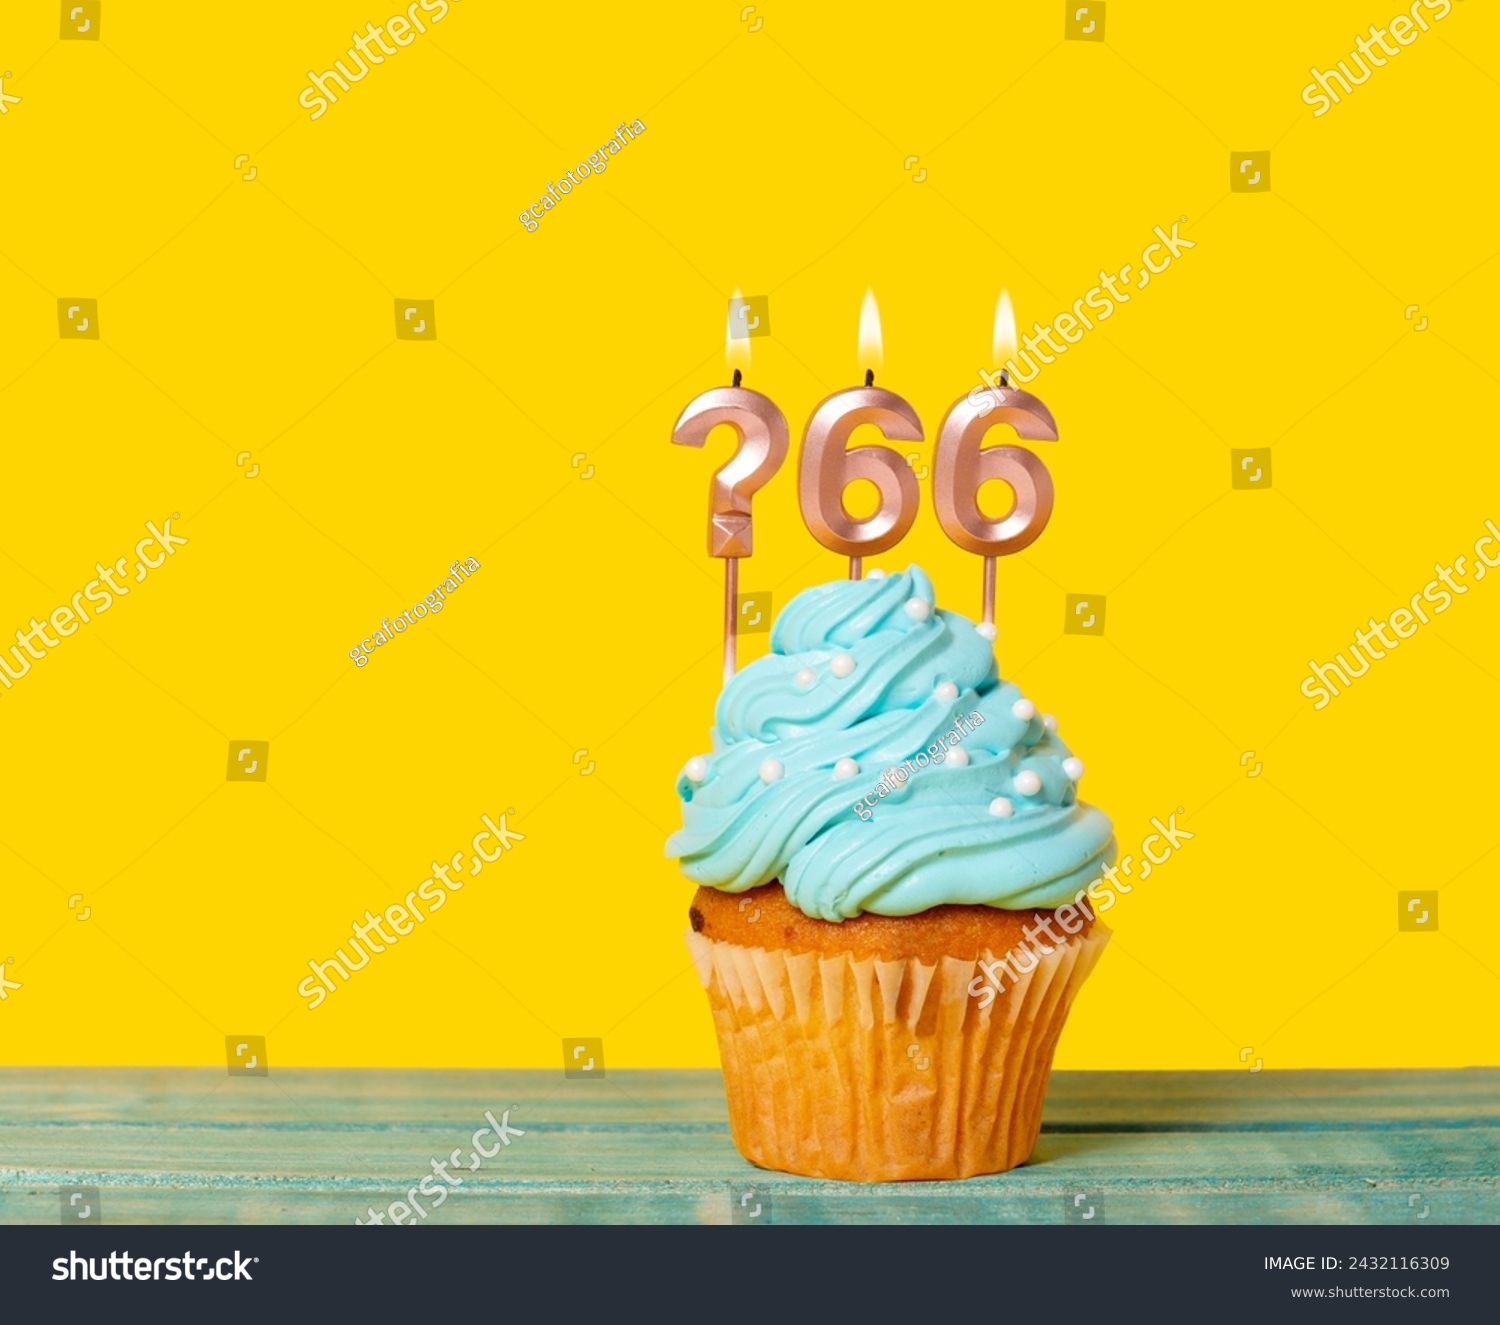 Birthday Cake With Candle Question Mark And Number 66 - On Yellow Background. #2432116309